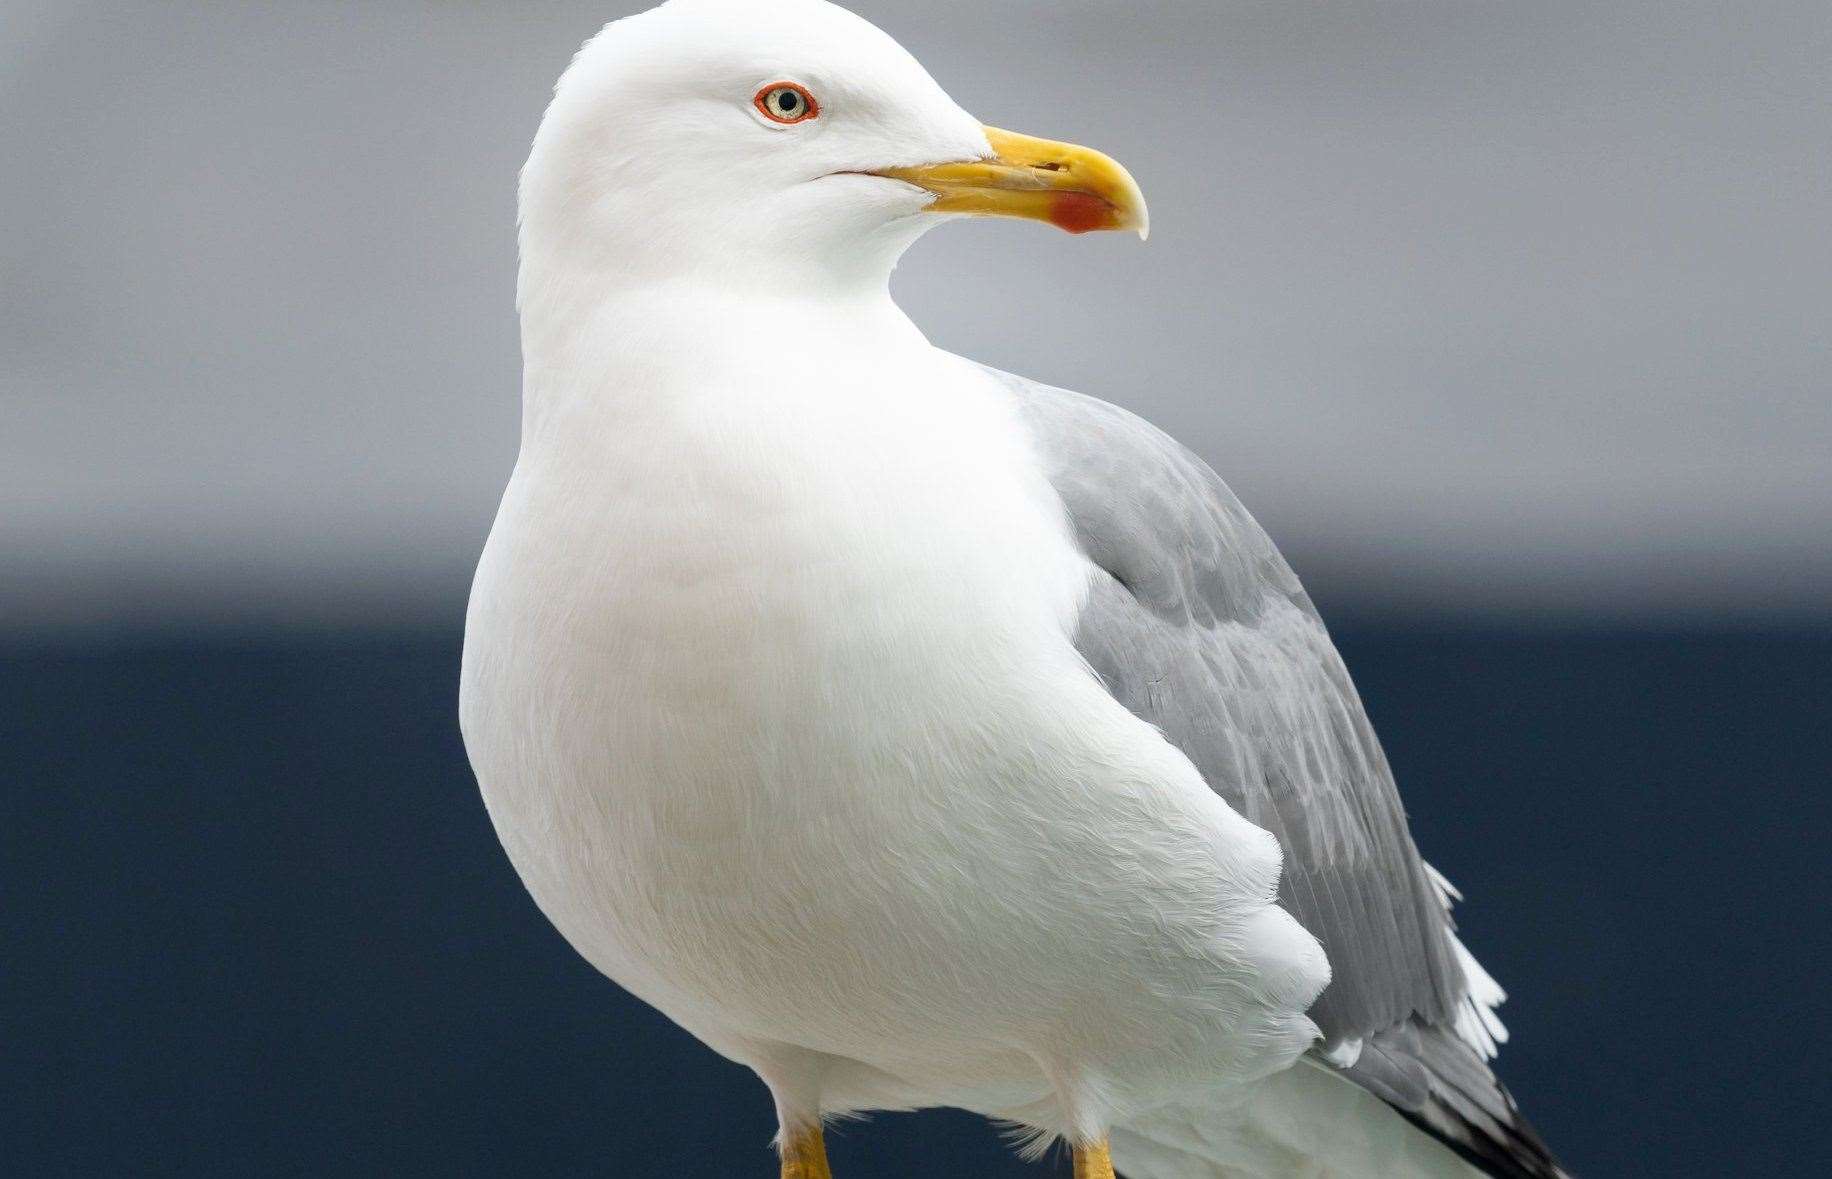 Seagulls like to eat the ants